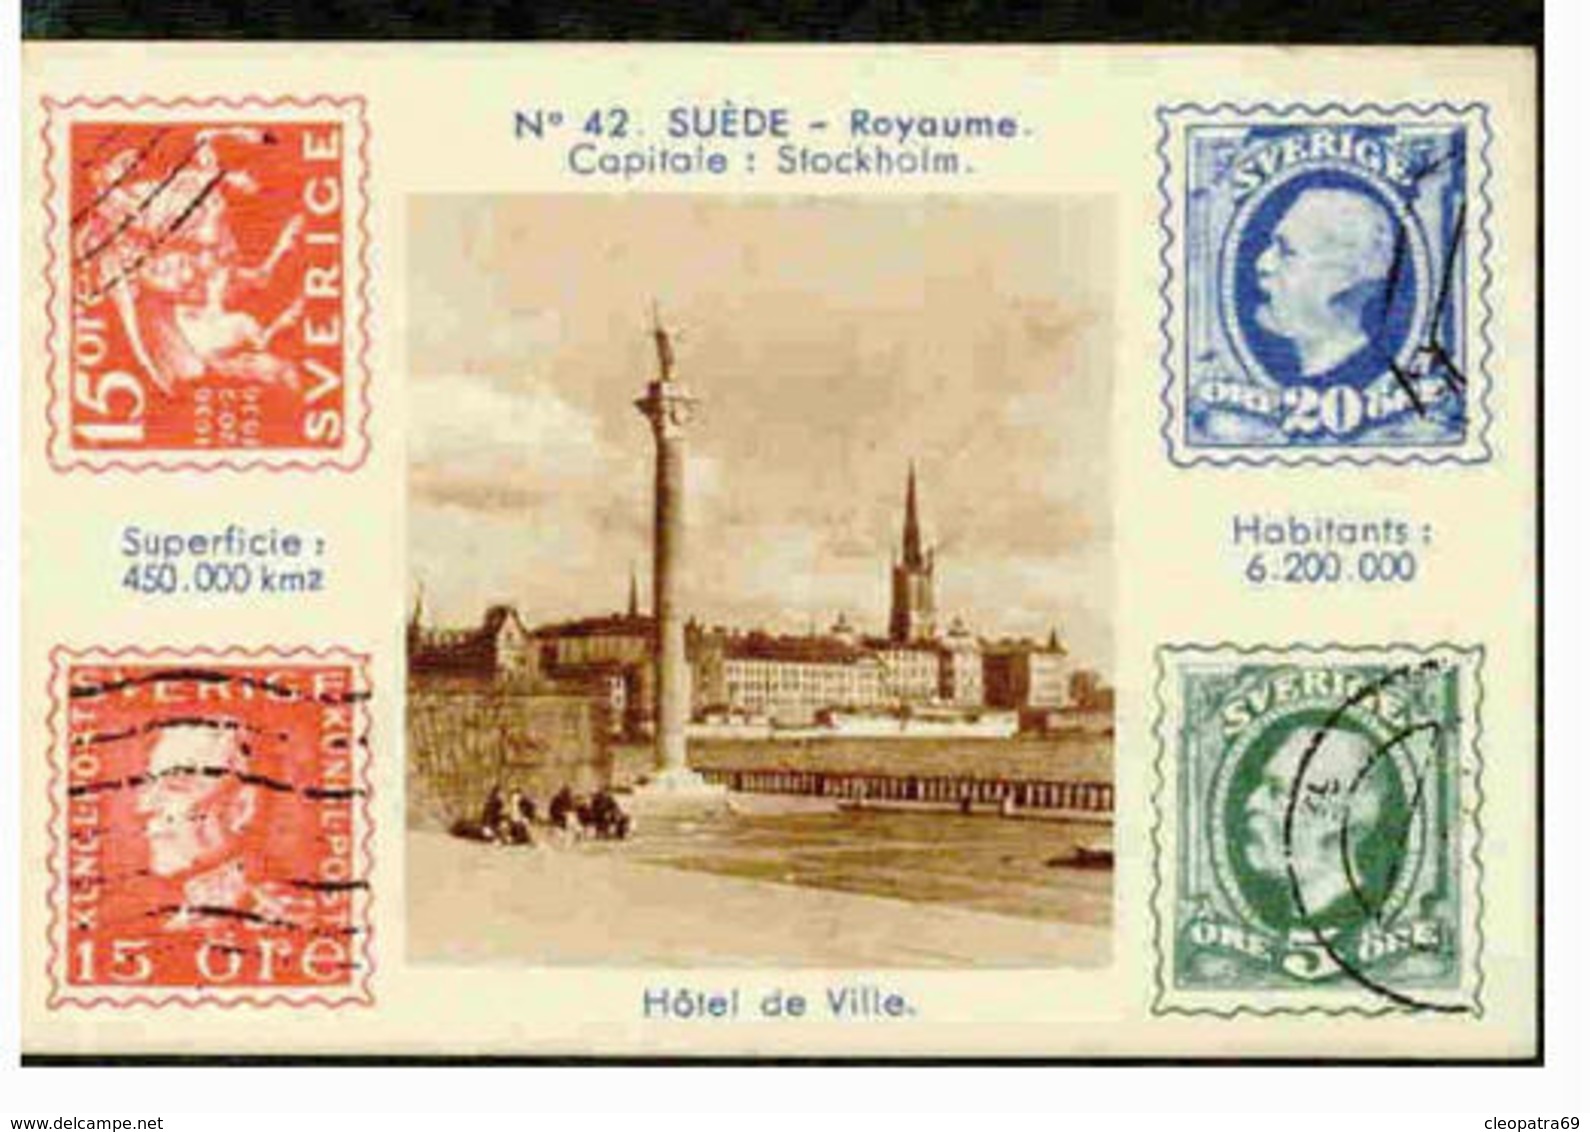 SWEDEN 1900'S SCENIC PHOTO STAMP ON STAMP 2.5x3.5 TRADING CARD S12937-1 - Timbres (représentations)